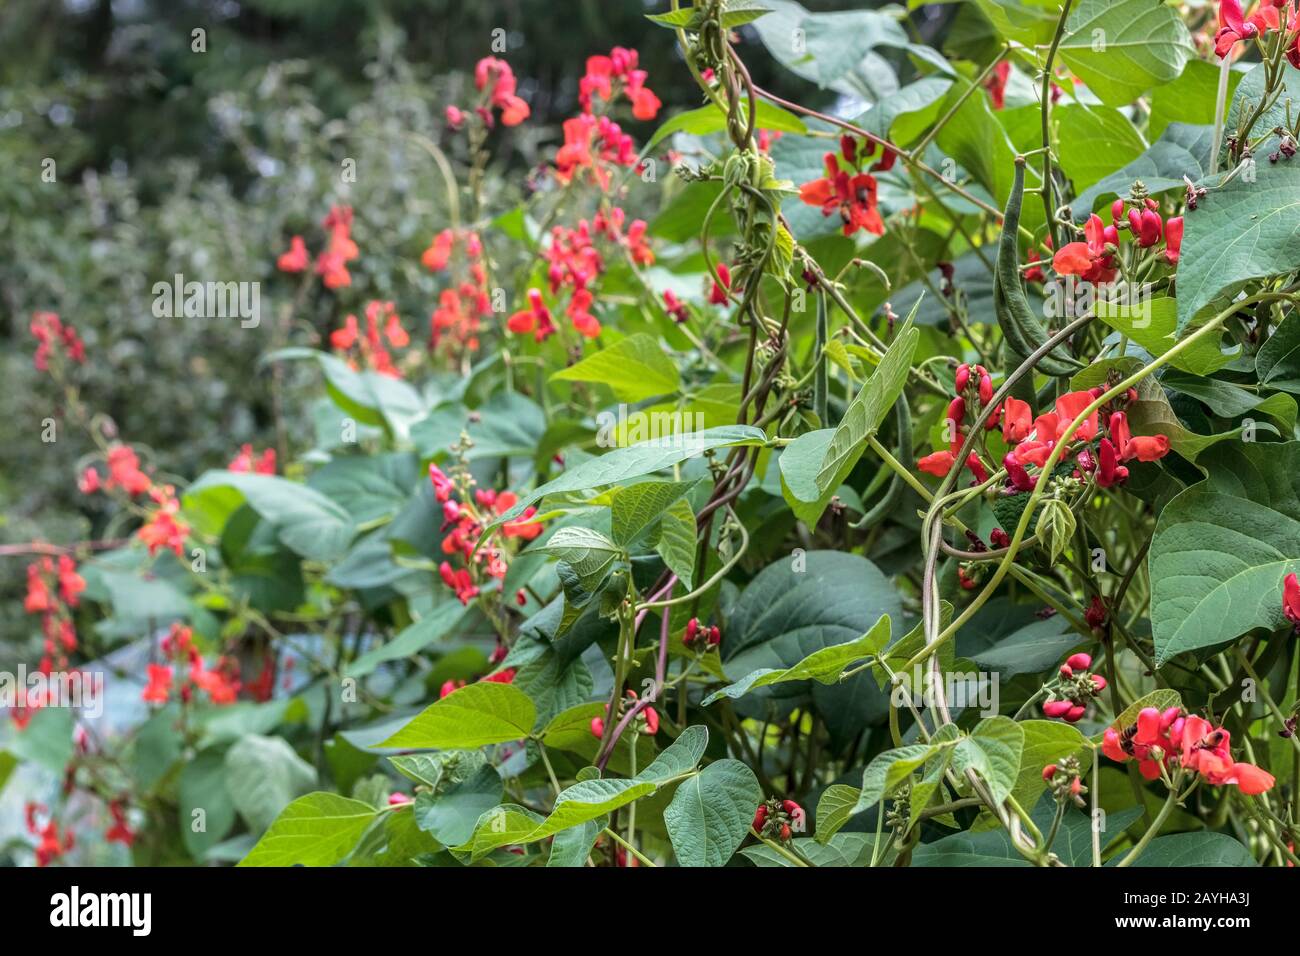 Tall, dense runner bean vines growing in a backyard garden are covered with bright red flowers, and their green beans have begun to produce as well. Stock Photo